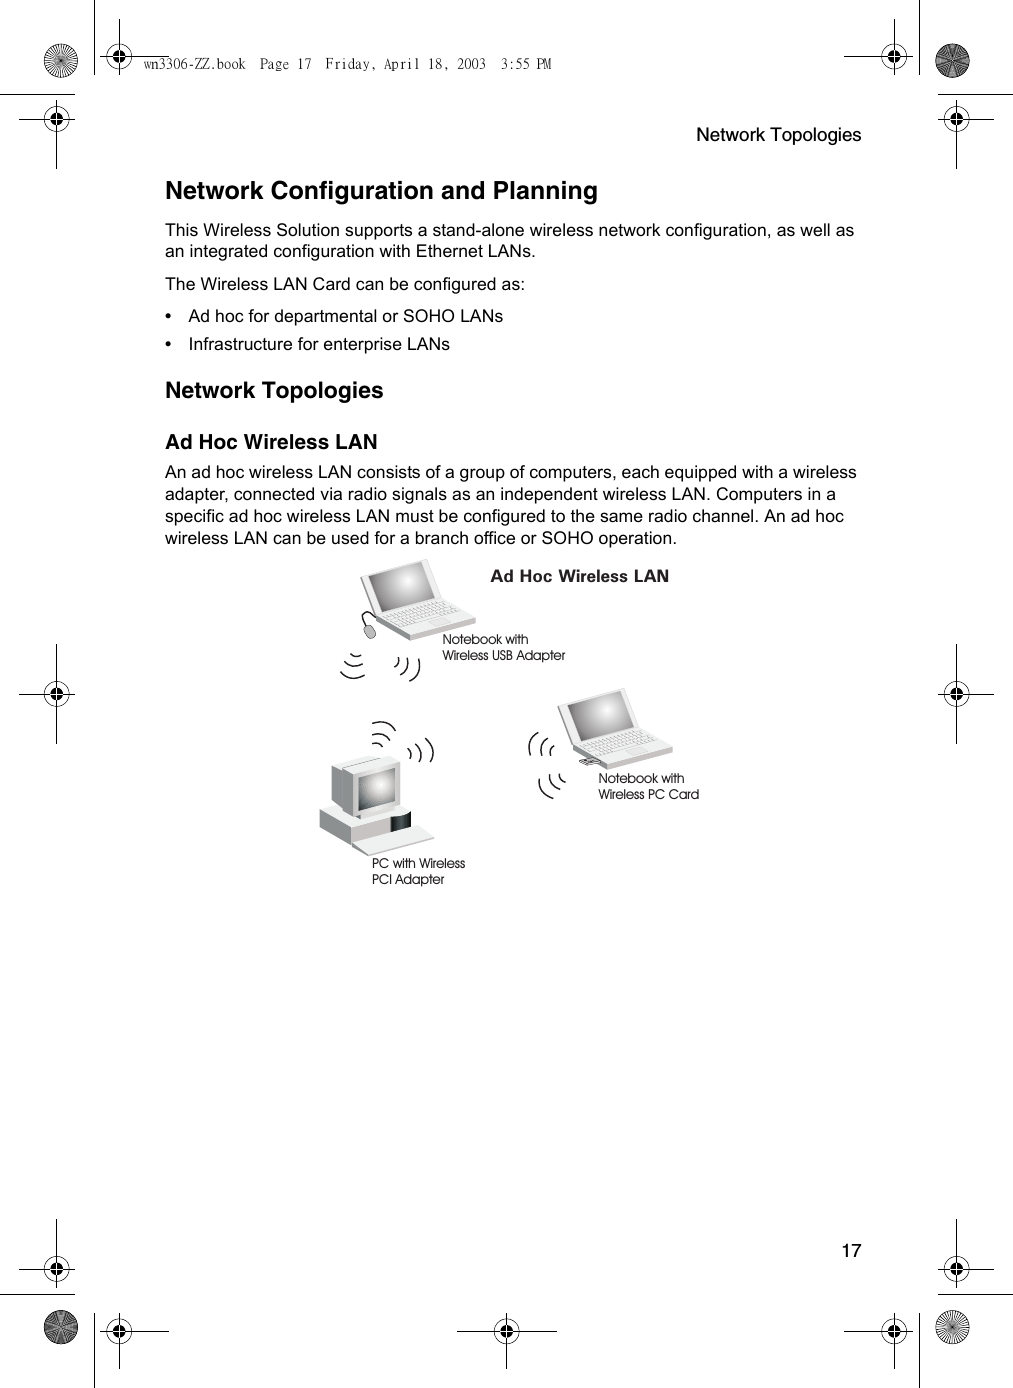 Network Topologies17Network Configuration and PlanningThis Wireless Solution supports a stand-alone wireless network configuration, as well as an integrated configuration with Ethernet LANs.The Wireless LAN Card can be configured as:•Ad hoc for departmental or SOHO LANs•Infrastructure for enterprise LANsNetwork TopologiesAd Hoc Wireless LANAn ad hoc wireless LAN consists of a group of computers, each equipped with a wireless adapter, connected via radio signals as an independent wireless LAN. Computers in a specific ad hoc wireless LAN must be configured to the same radio channel. An ad hoc wireless LAN can be used for a branch office or SOHO operation.Ad Hoc Wireless LANNotebook withWireless USB AdapterNotebook withWireless PC CardPC with WirelessPCI Adapterwn3306-ZZ.book  Page 17  Friday, April 18, 2003  3:55 PM